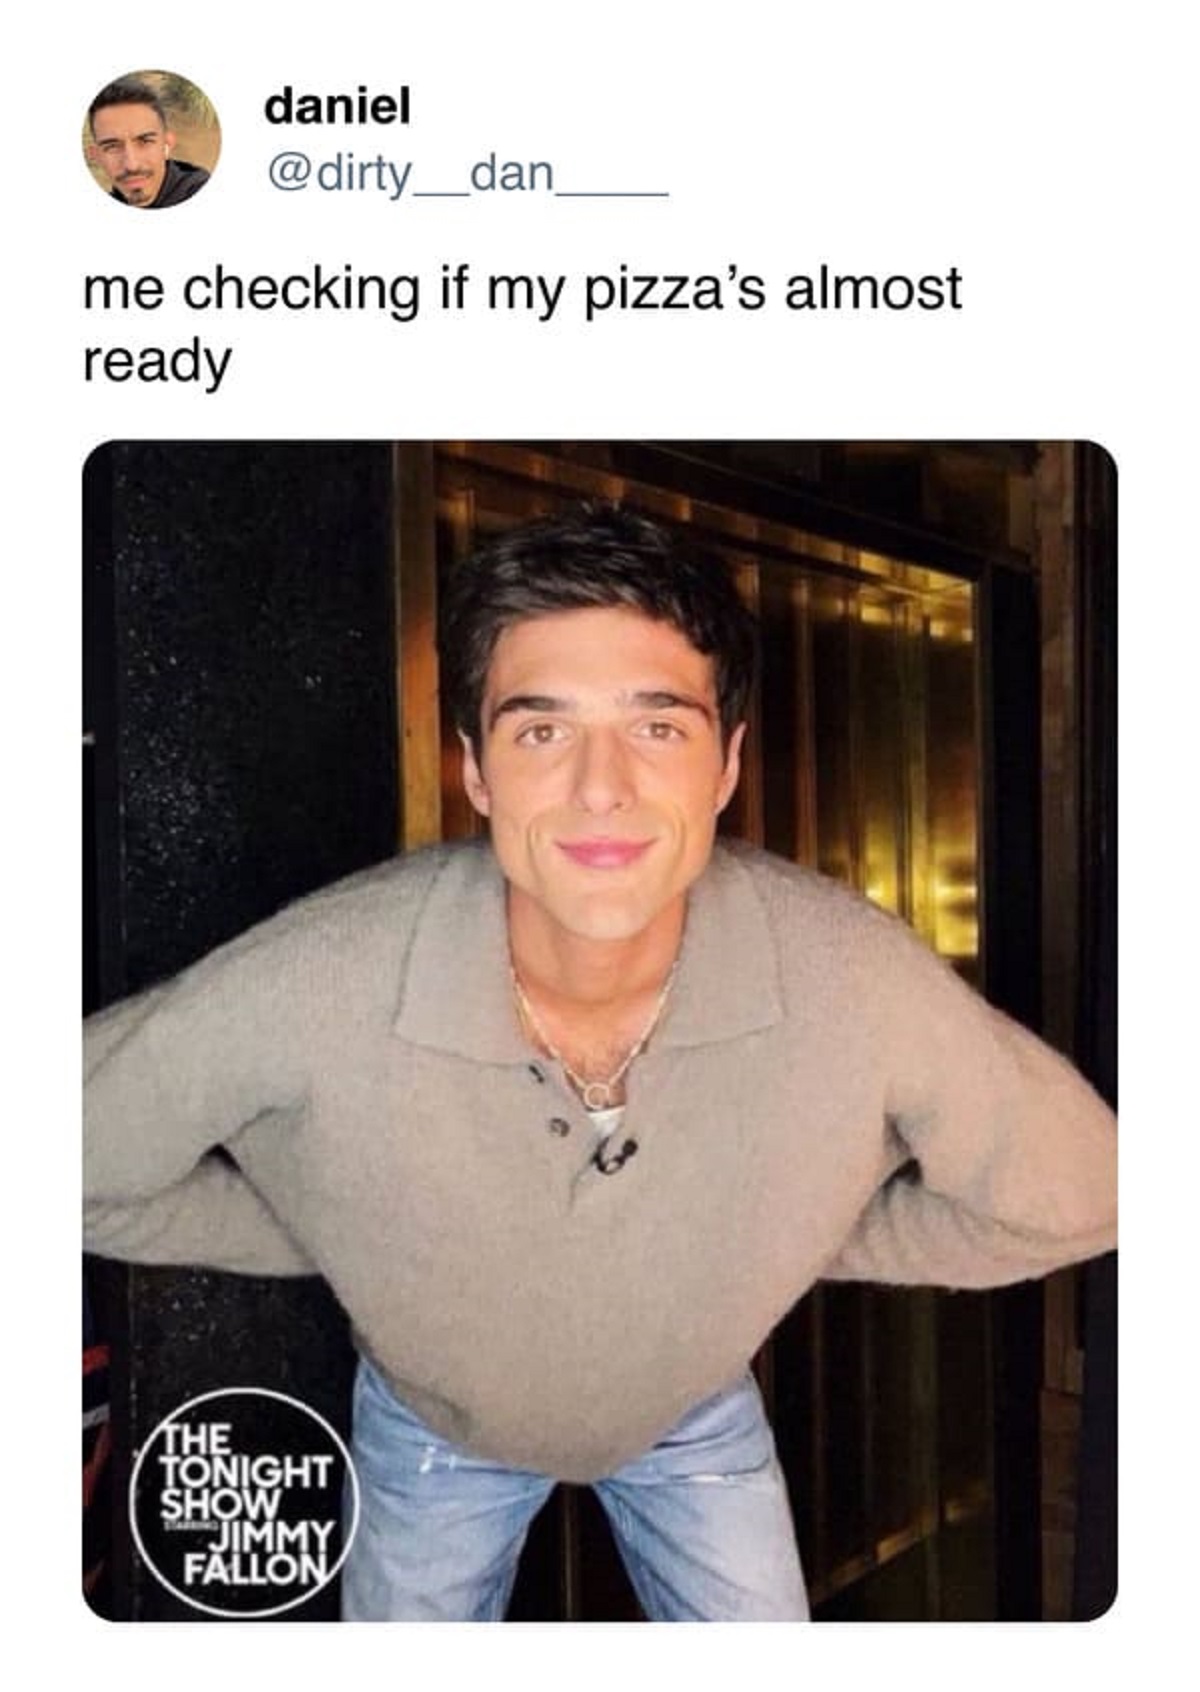 photo caption - daniel me checking if my pizza's almost ready The Tonight Show Jimmy Fallon